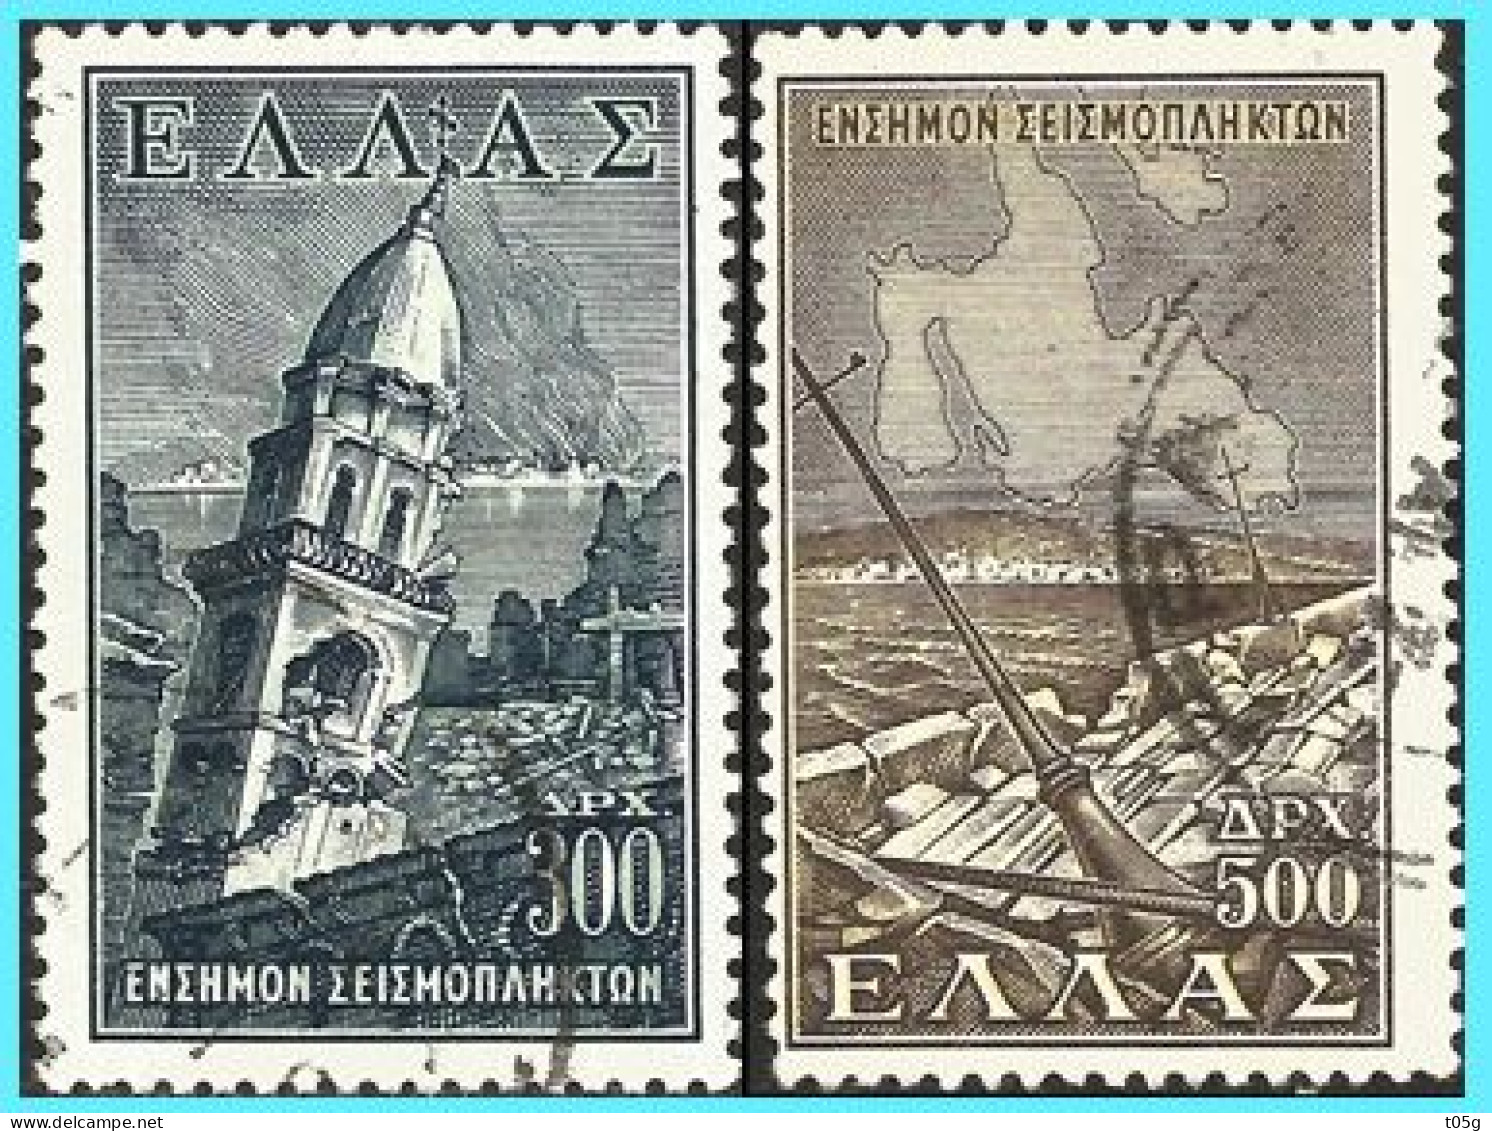 GREECE- GRECE - HELLAS 1953: " Ionian Islands Earthquake Fund Issue" Complet Set Used - Beneficenza